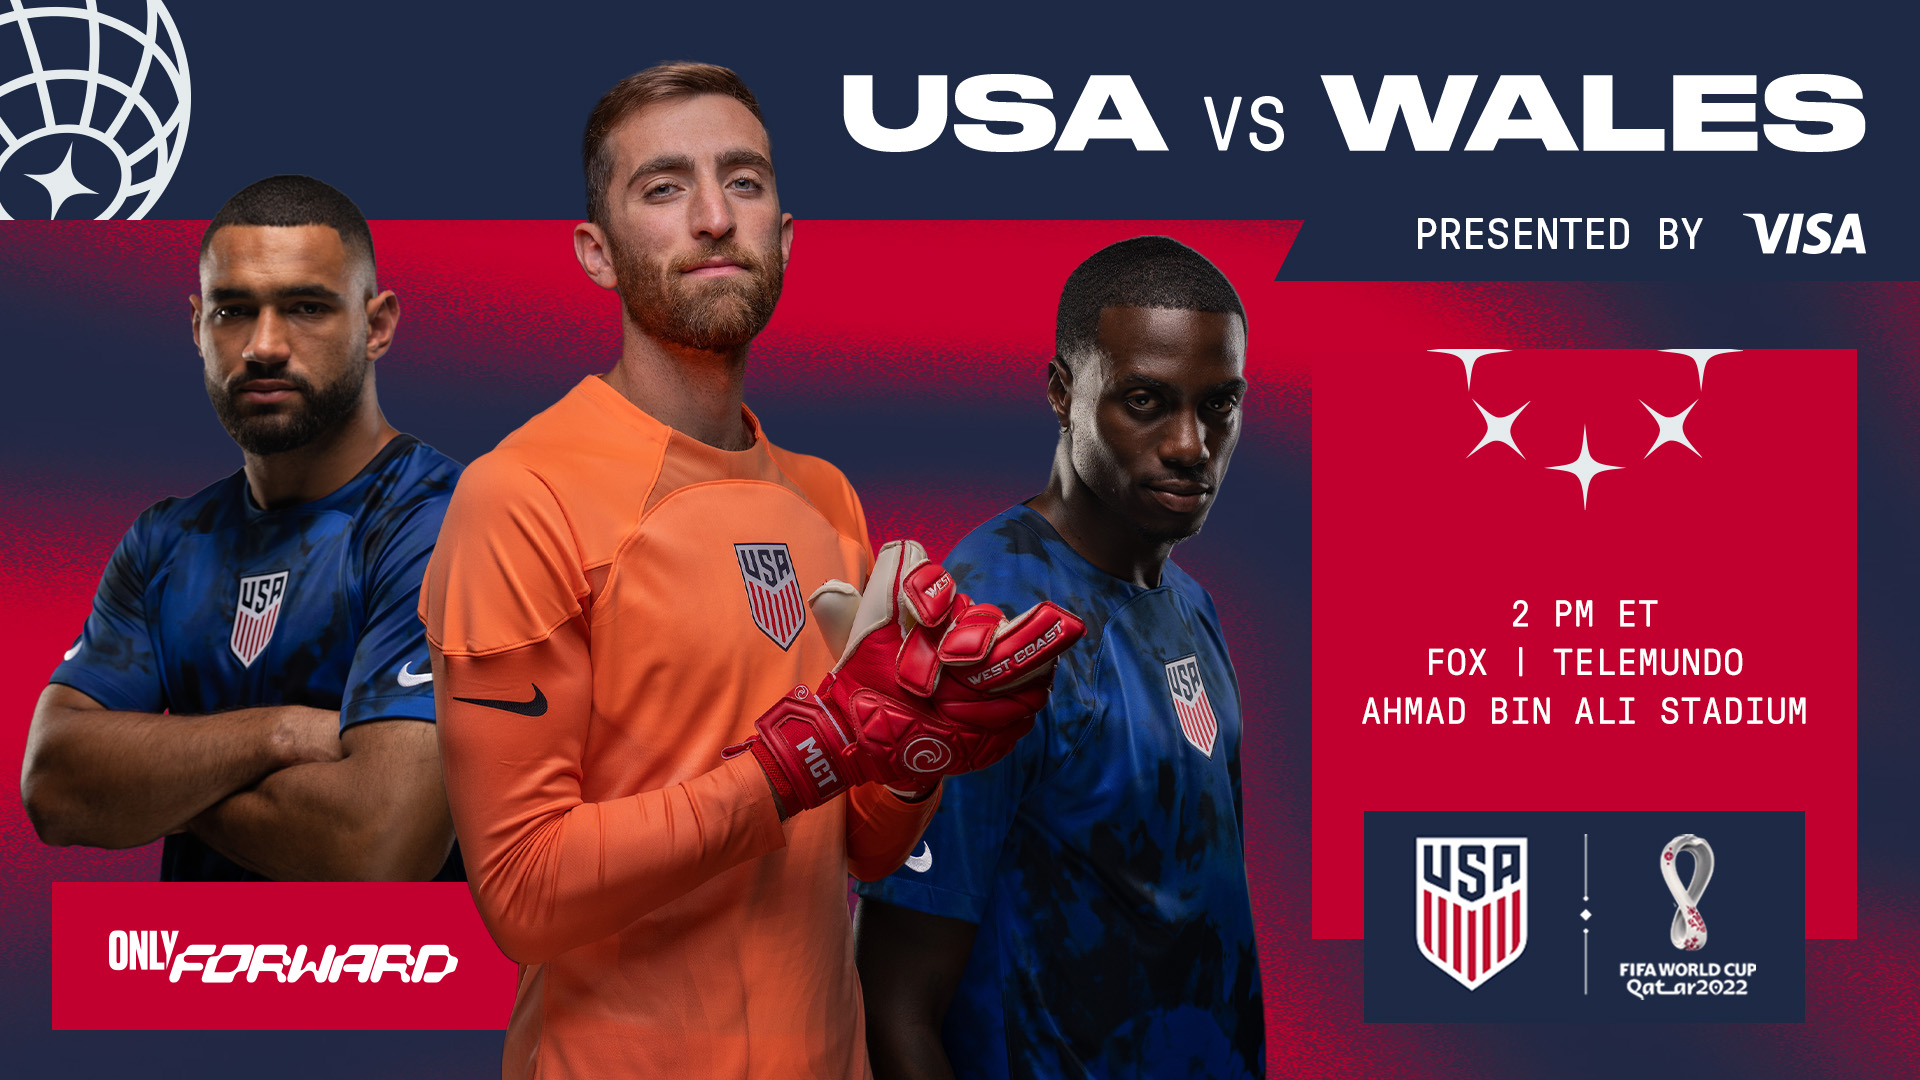 Preview USMNT Ready To Kick Off 2022 FIFA World Cup Against Wales